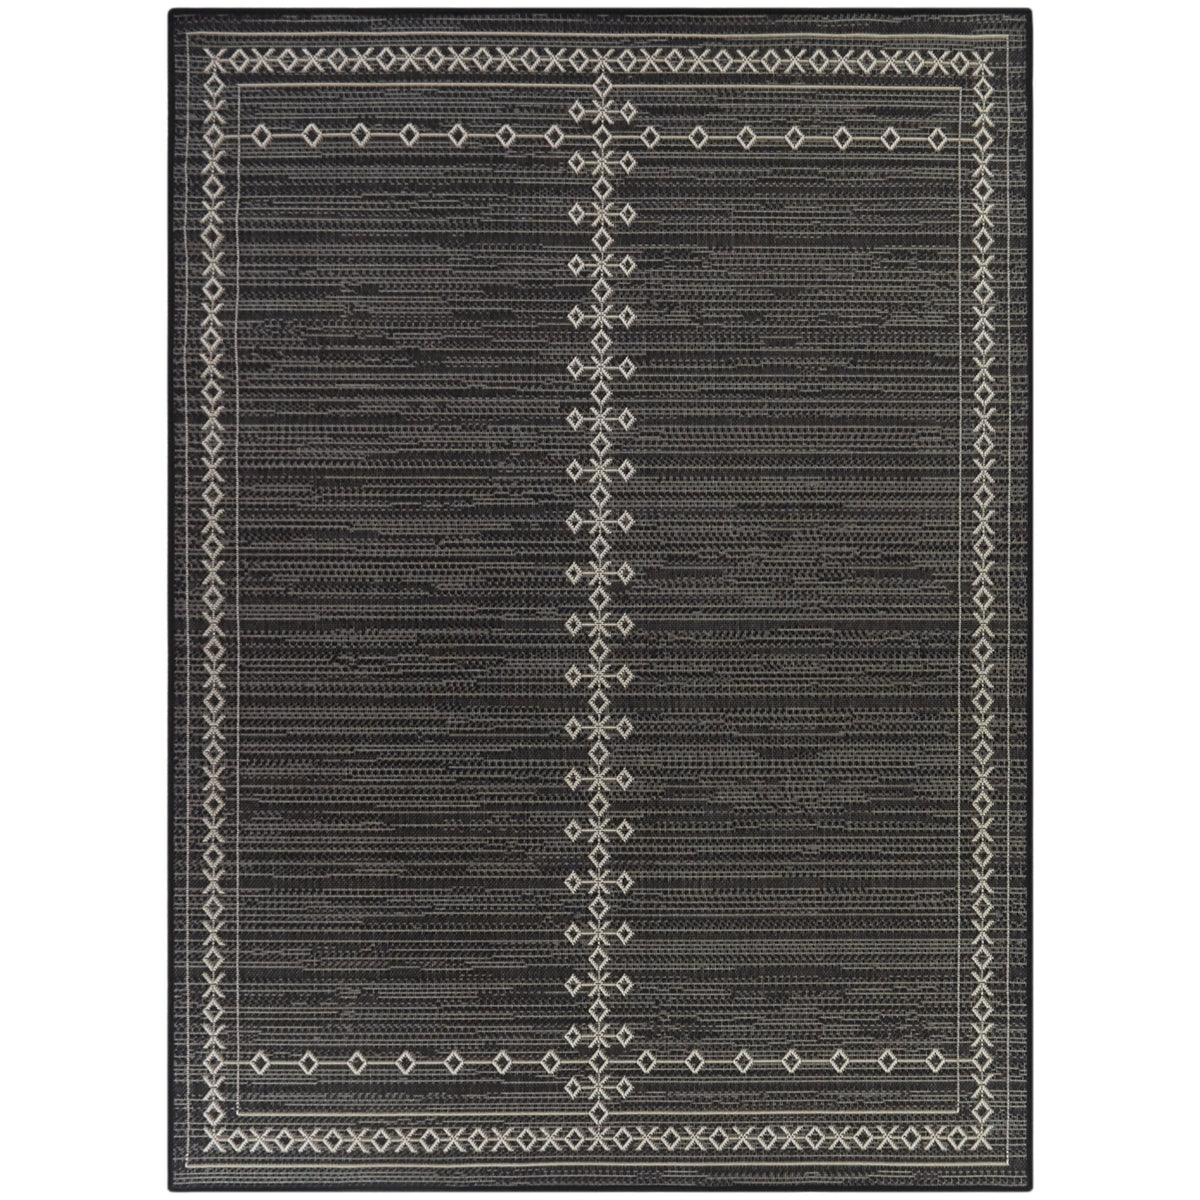 Benet Recycled Moroccan Area Rug